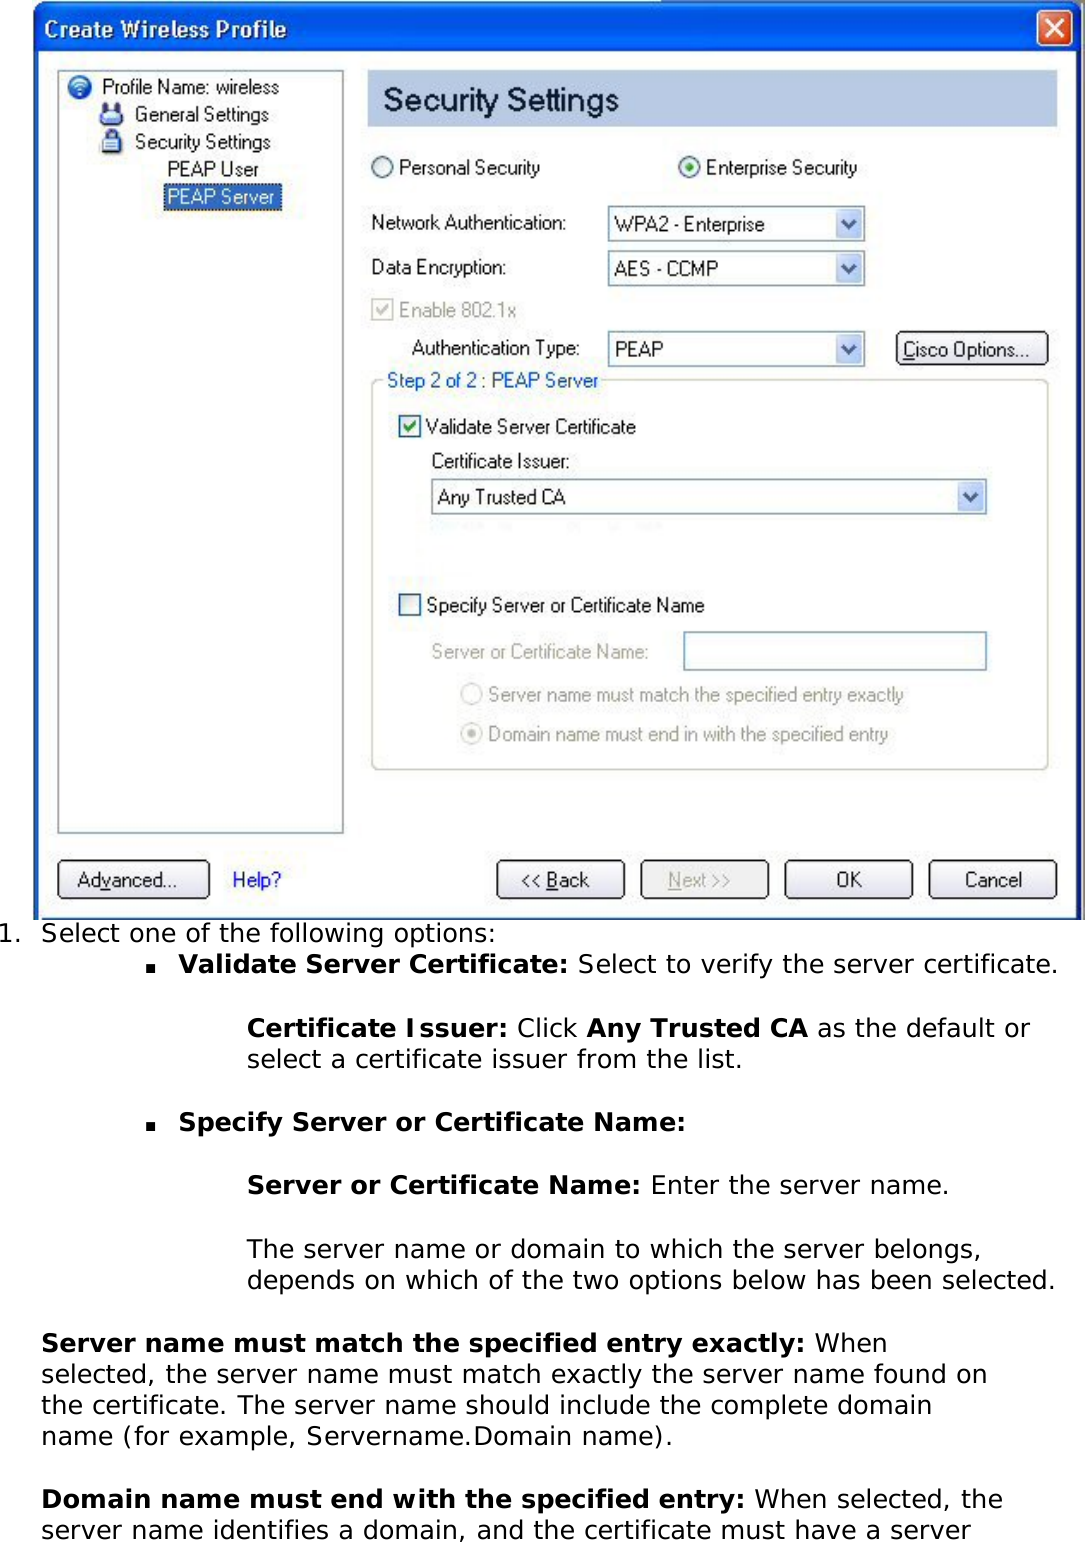 1.  Select one of the following options: ■     Validate Server Certificate: Select to verify the server certificate. Certificate Issuer: Click Any Trusted CA as the default or select a certificate issuer from the list. ■     Specify Server or Certificate Name: Server or Certificate Name: Enter the server name. The server name or domain to which the server belongs, depends on which of the two options below has been selected. Server name must match the specified entry exactly: When selected, the server name must match exactly the server name found on the certificate. The server name should include the complete domain name (for example, Servername.Domain name). Domain name must end with the specified entry: When selected, the server name identifies a domain, and the certificate must have a server 